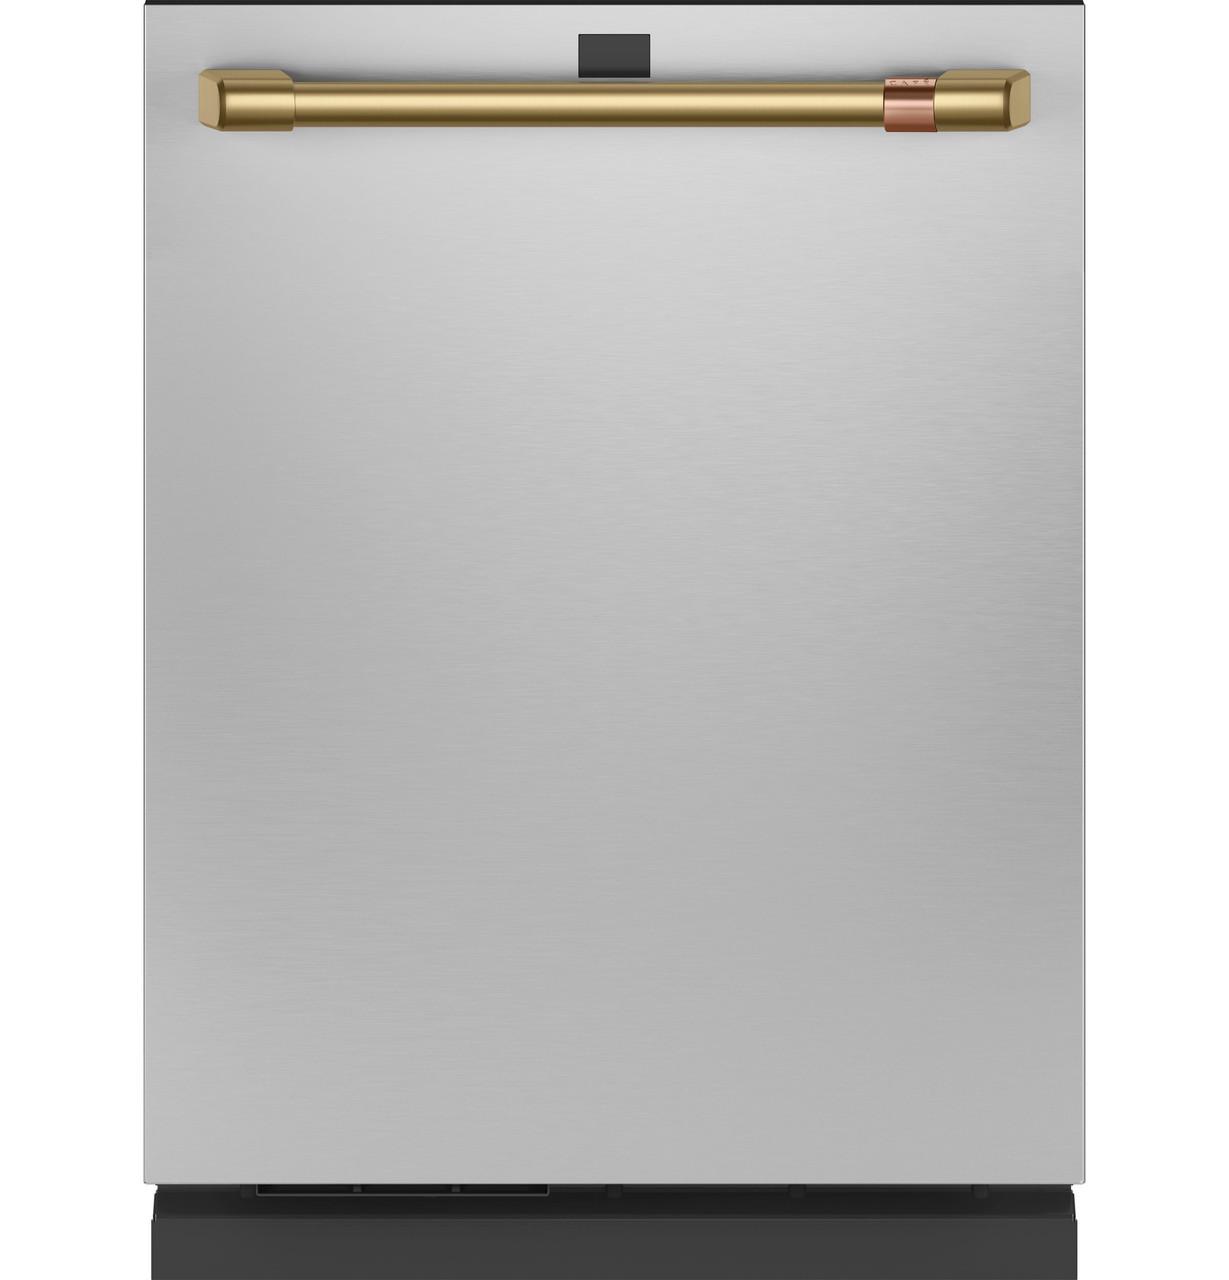 Cafe Caf(eback)™ ENERGY STAR® Smart Stainless Steel Interior Dishwasher with Sanitize and Ultra Wash